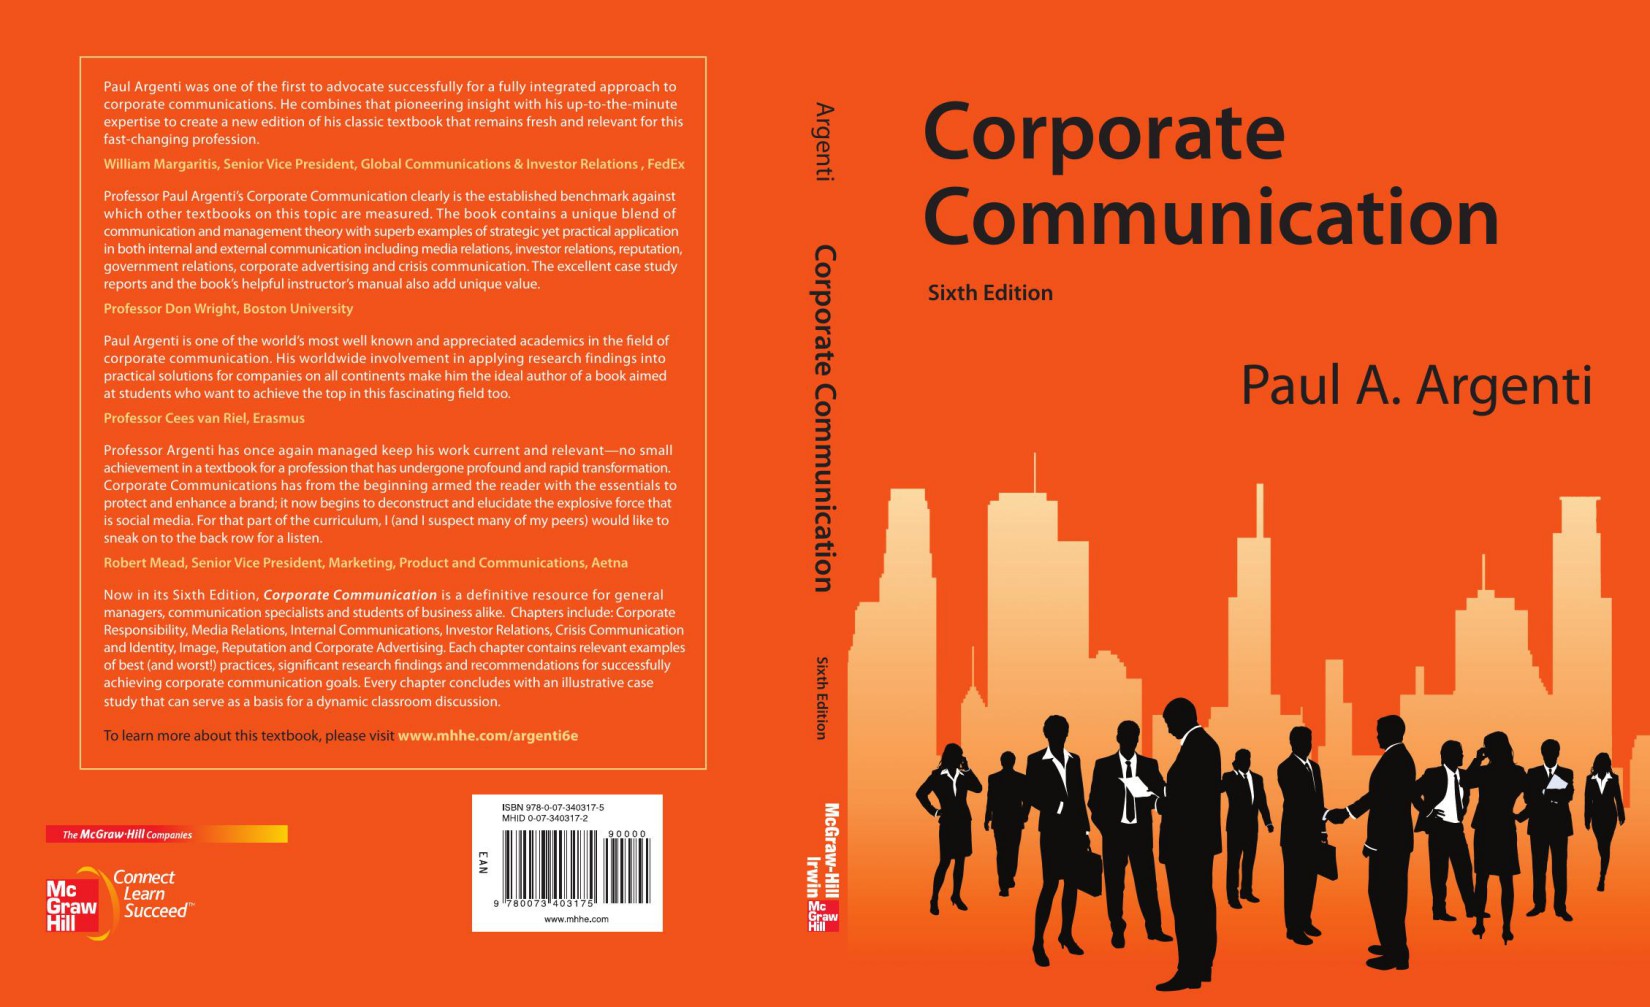 Corporate Communication 6th Edition by Paul Argent.jpg